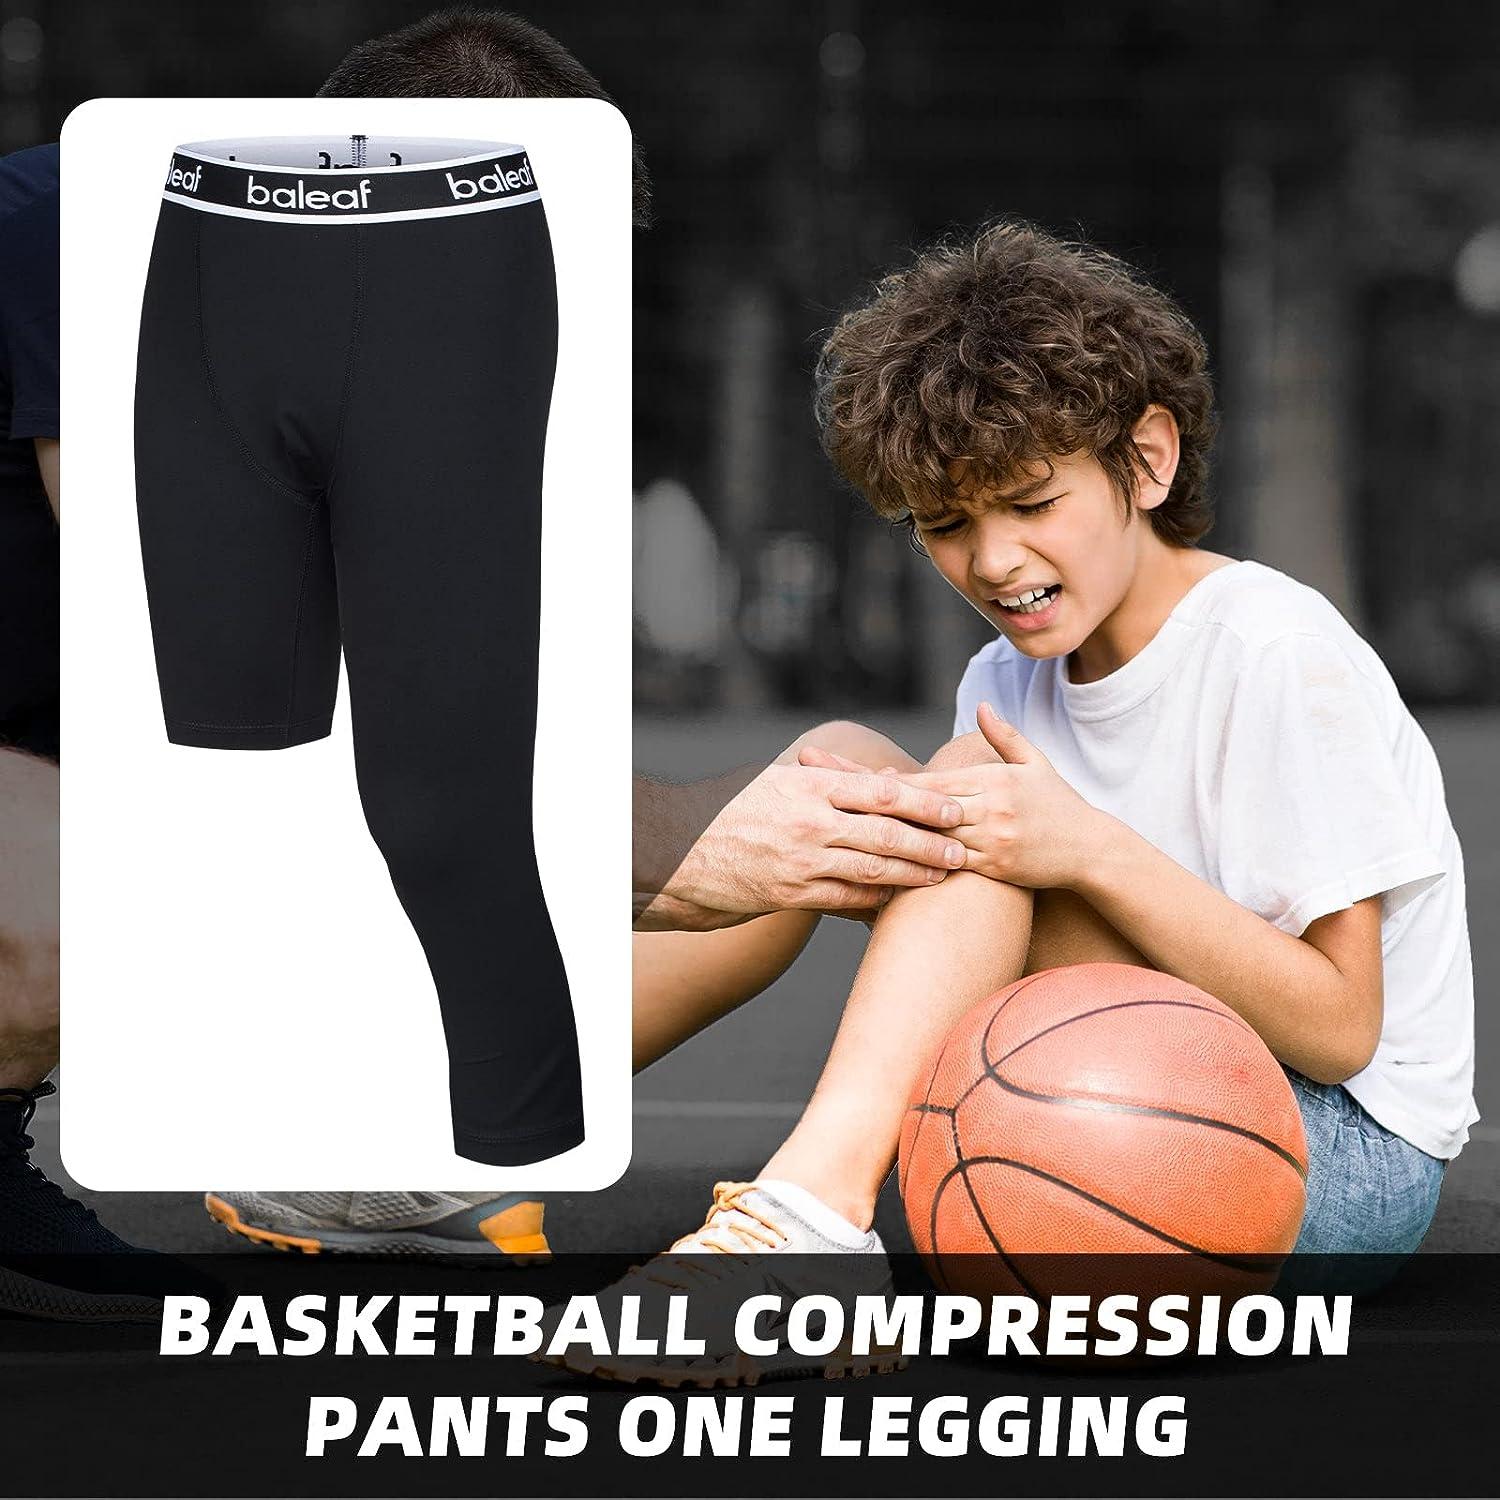  Youth Boys Compression Pants 3/4 Length Sports